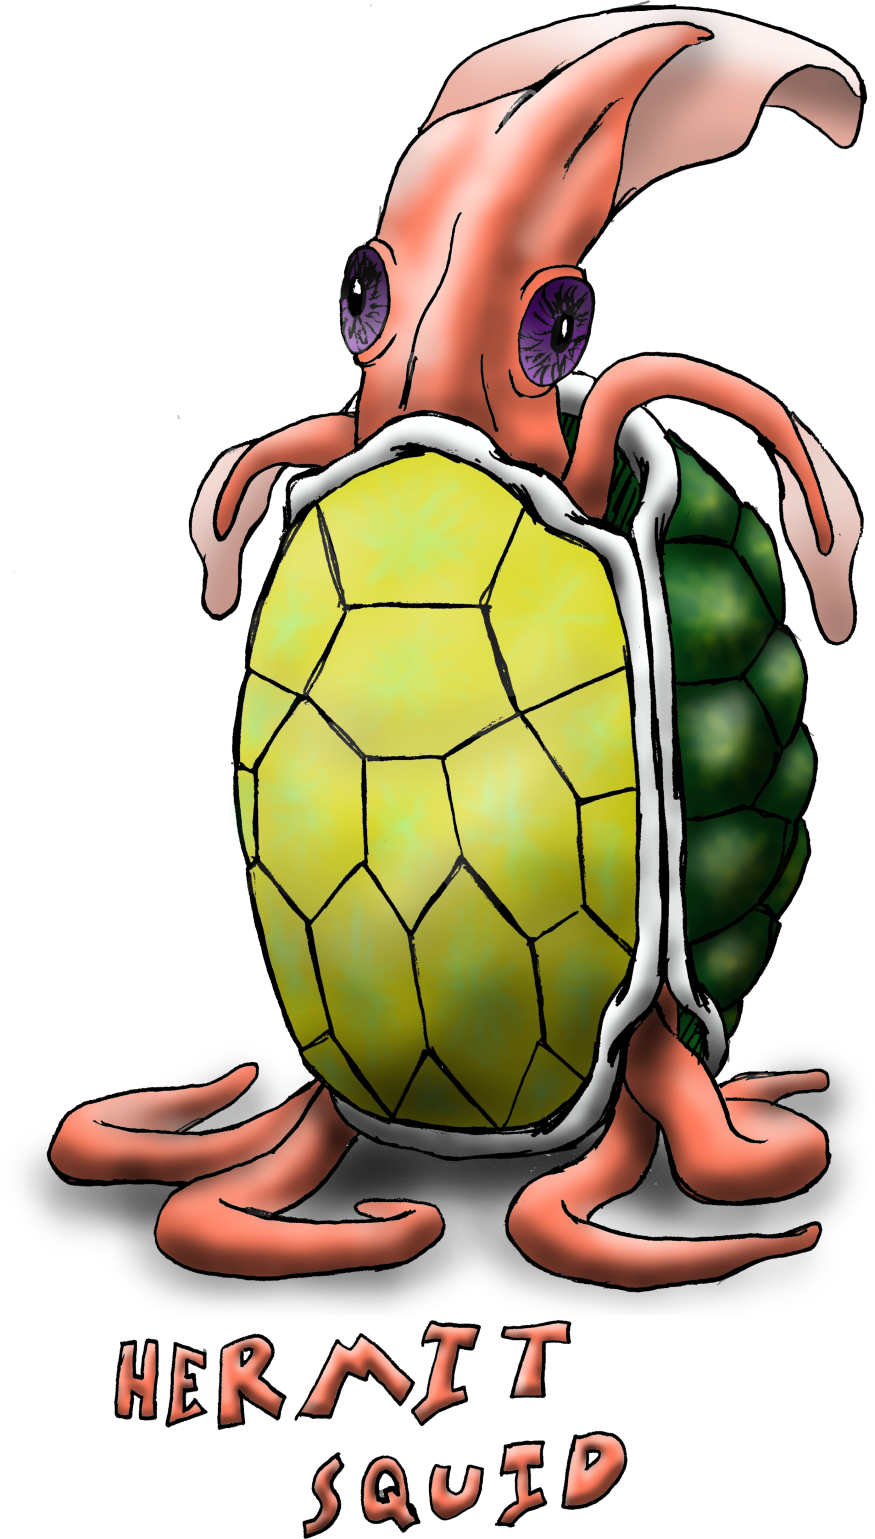 Hermit Squid - Since the Hermit Squid has legs, it feels that it deserves to live on land. Whenever it finds something from the surface world, it picks it up and tries to pass itself off as this new identity. This particular one is trying to convince us that it is a tortoise.